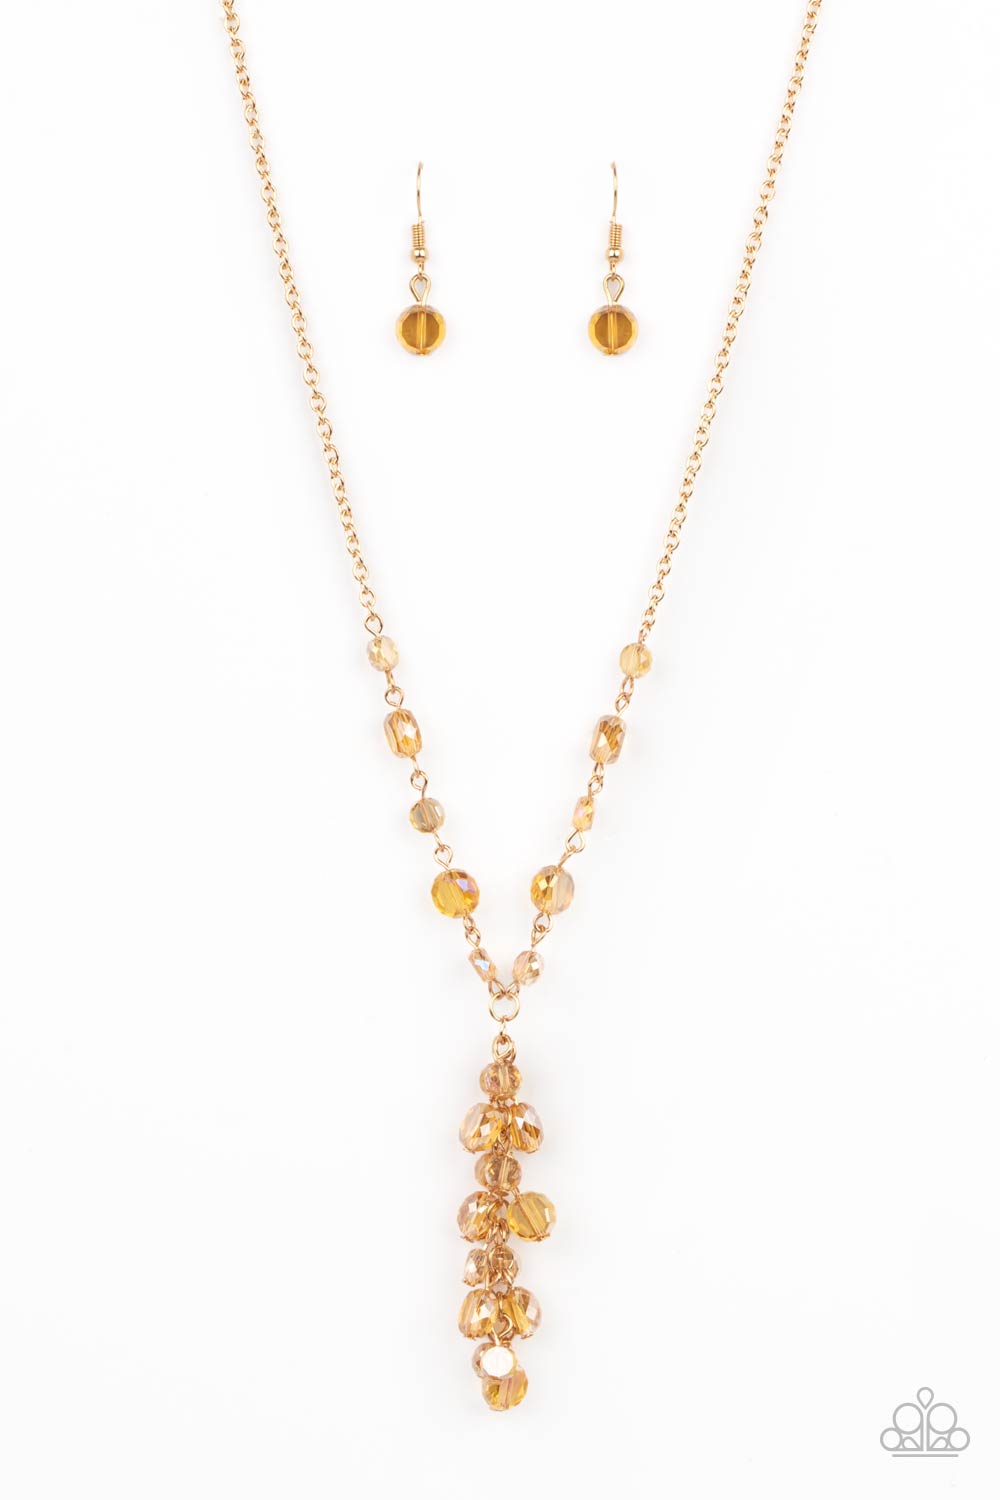 Cosmic Charisma - Gold necklace 2118